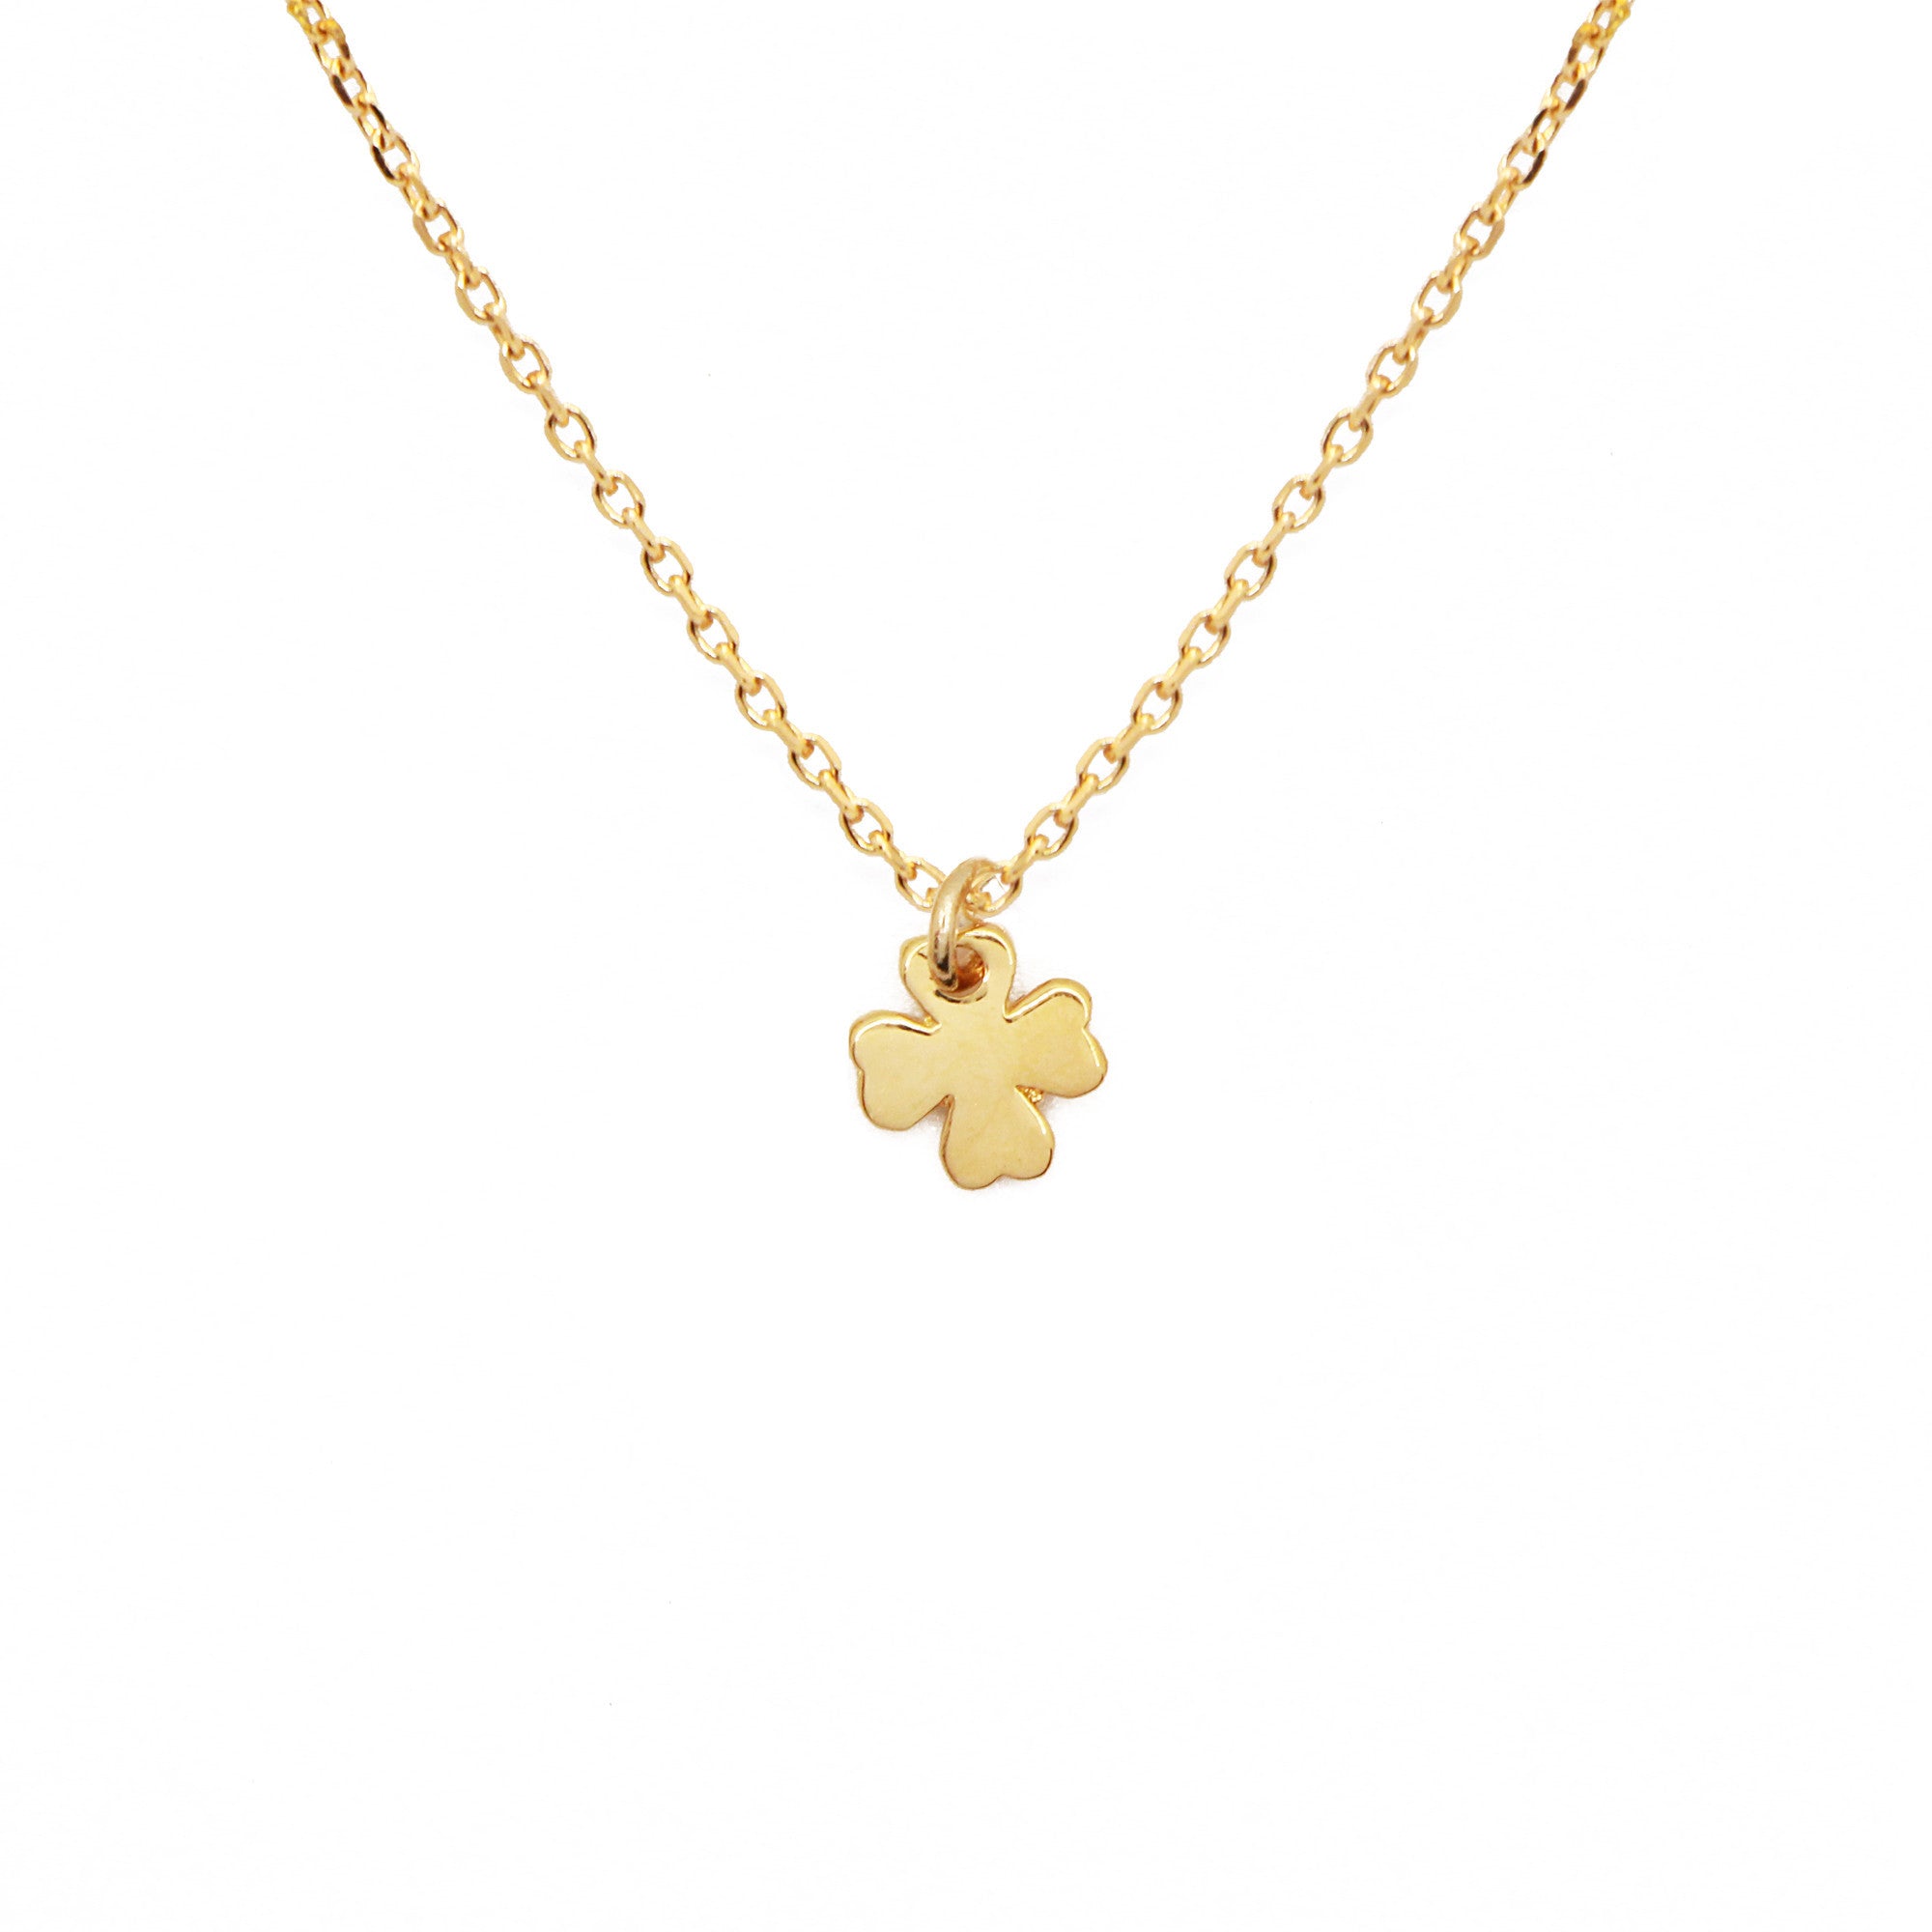 Clover charm chain necklace